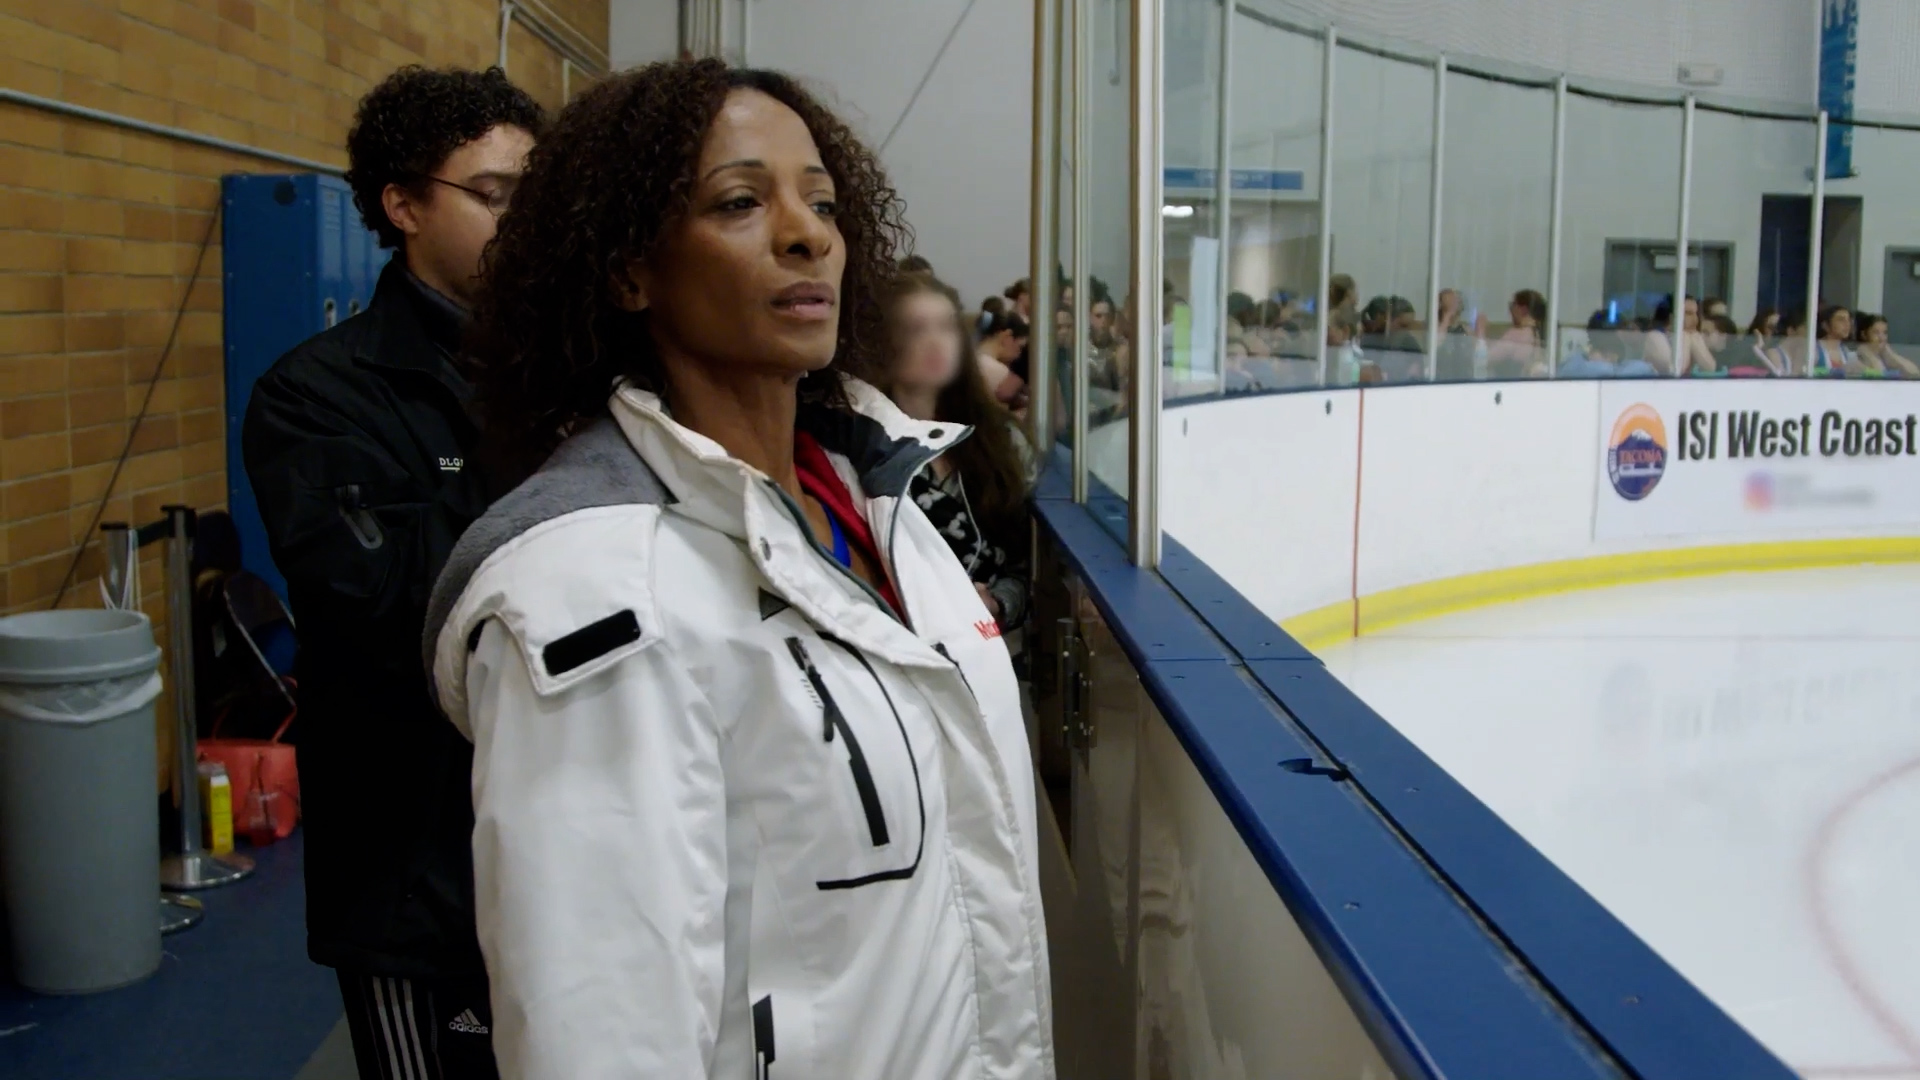 Watch Sneak Peek: "I Never Get a Thank You!" | Breaking the Ice Video Extras